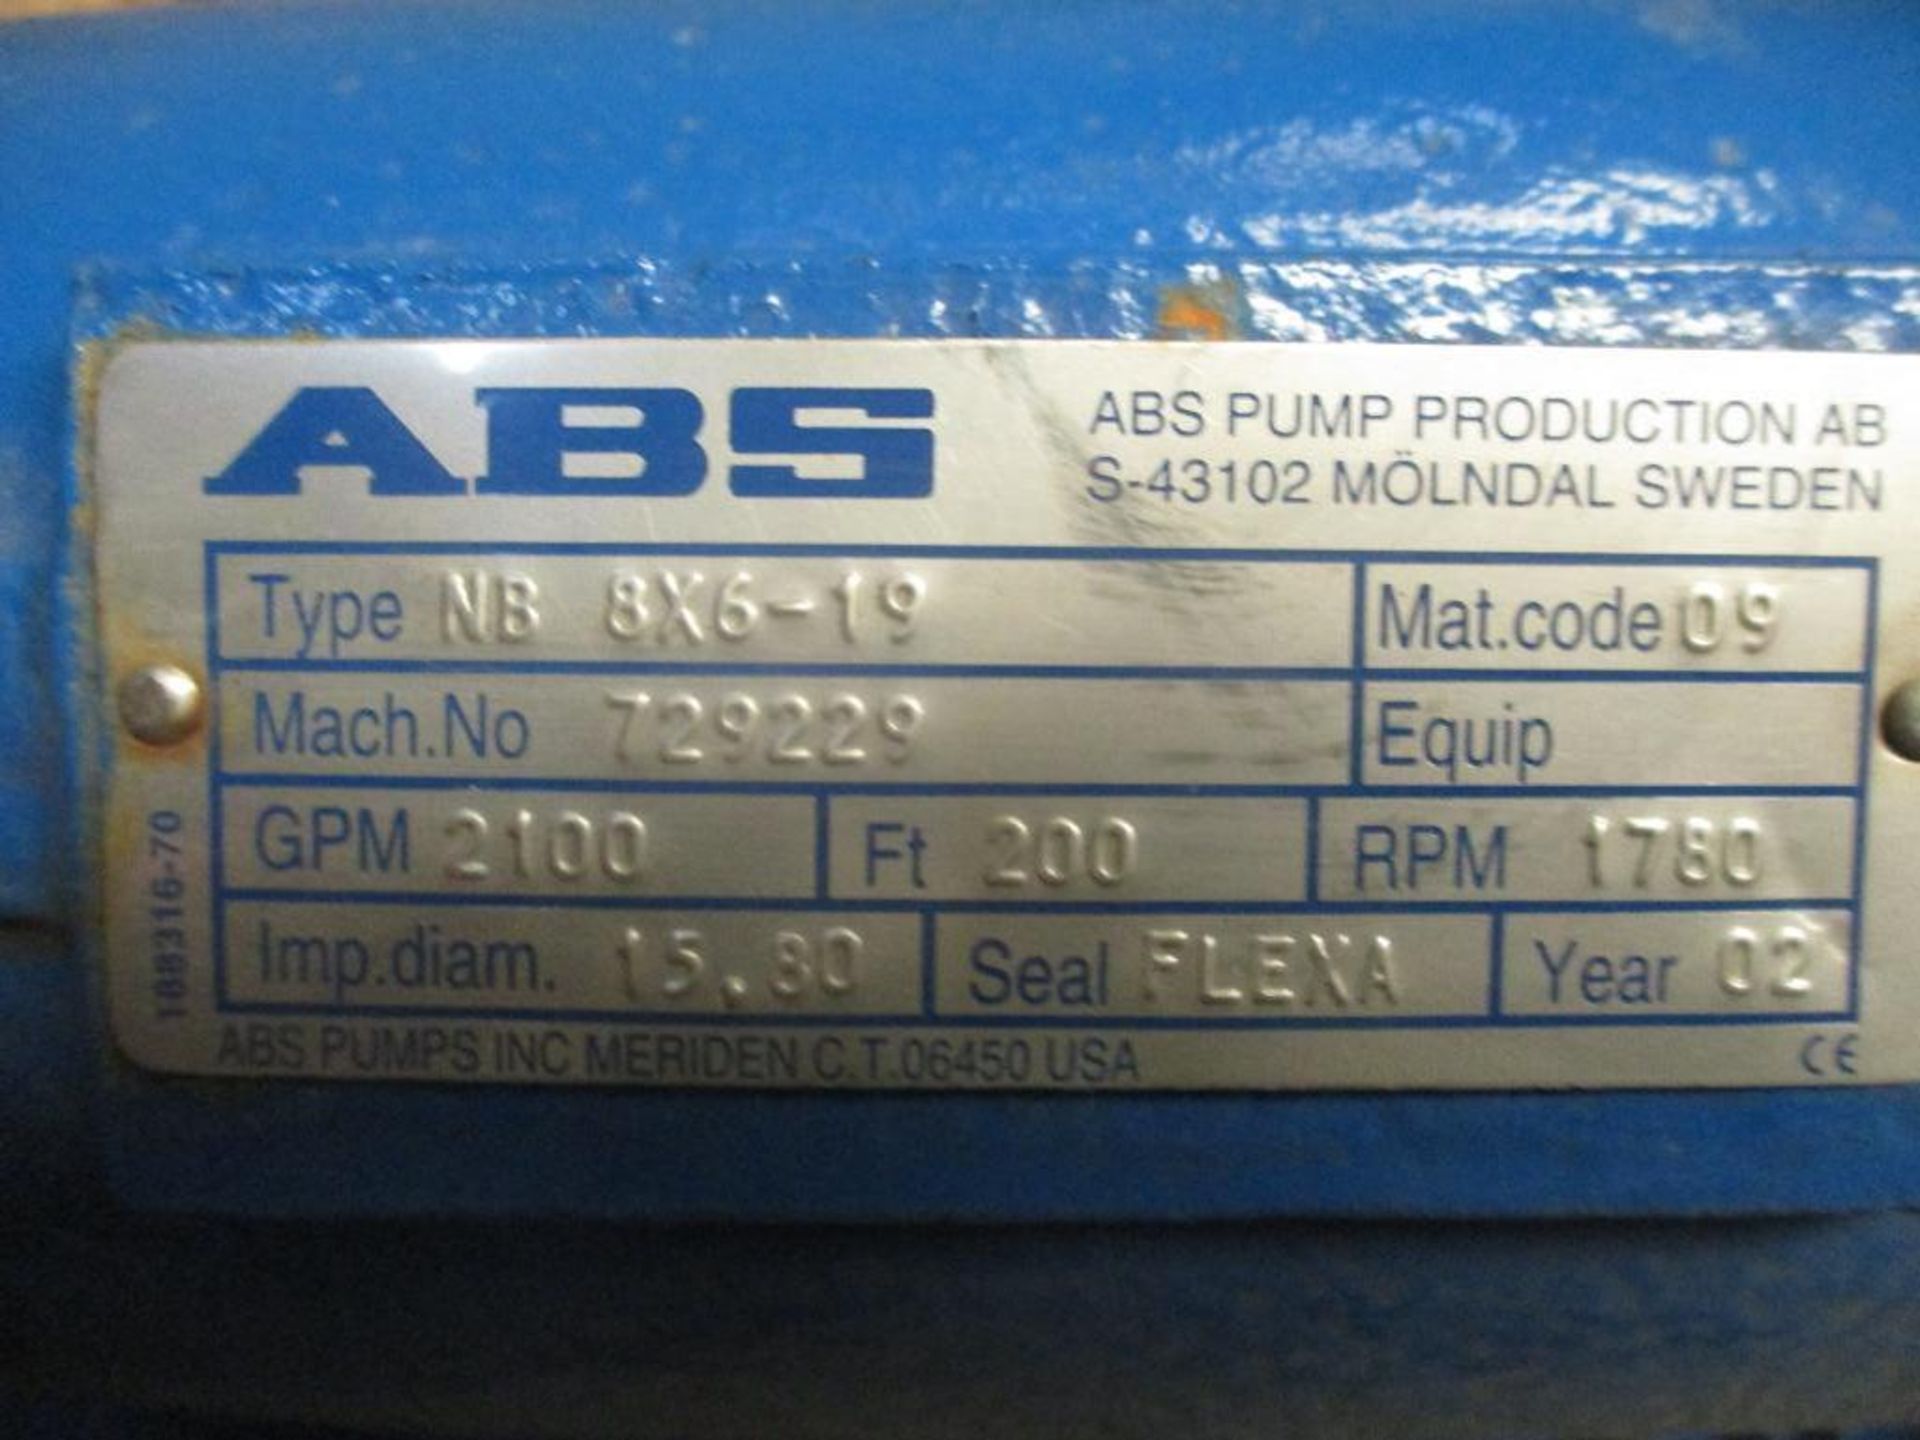 ABS NB 8x6-19 Iron Casing (New) - Image 4 of 4